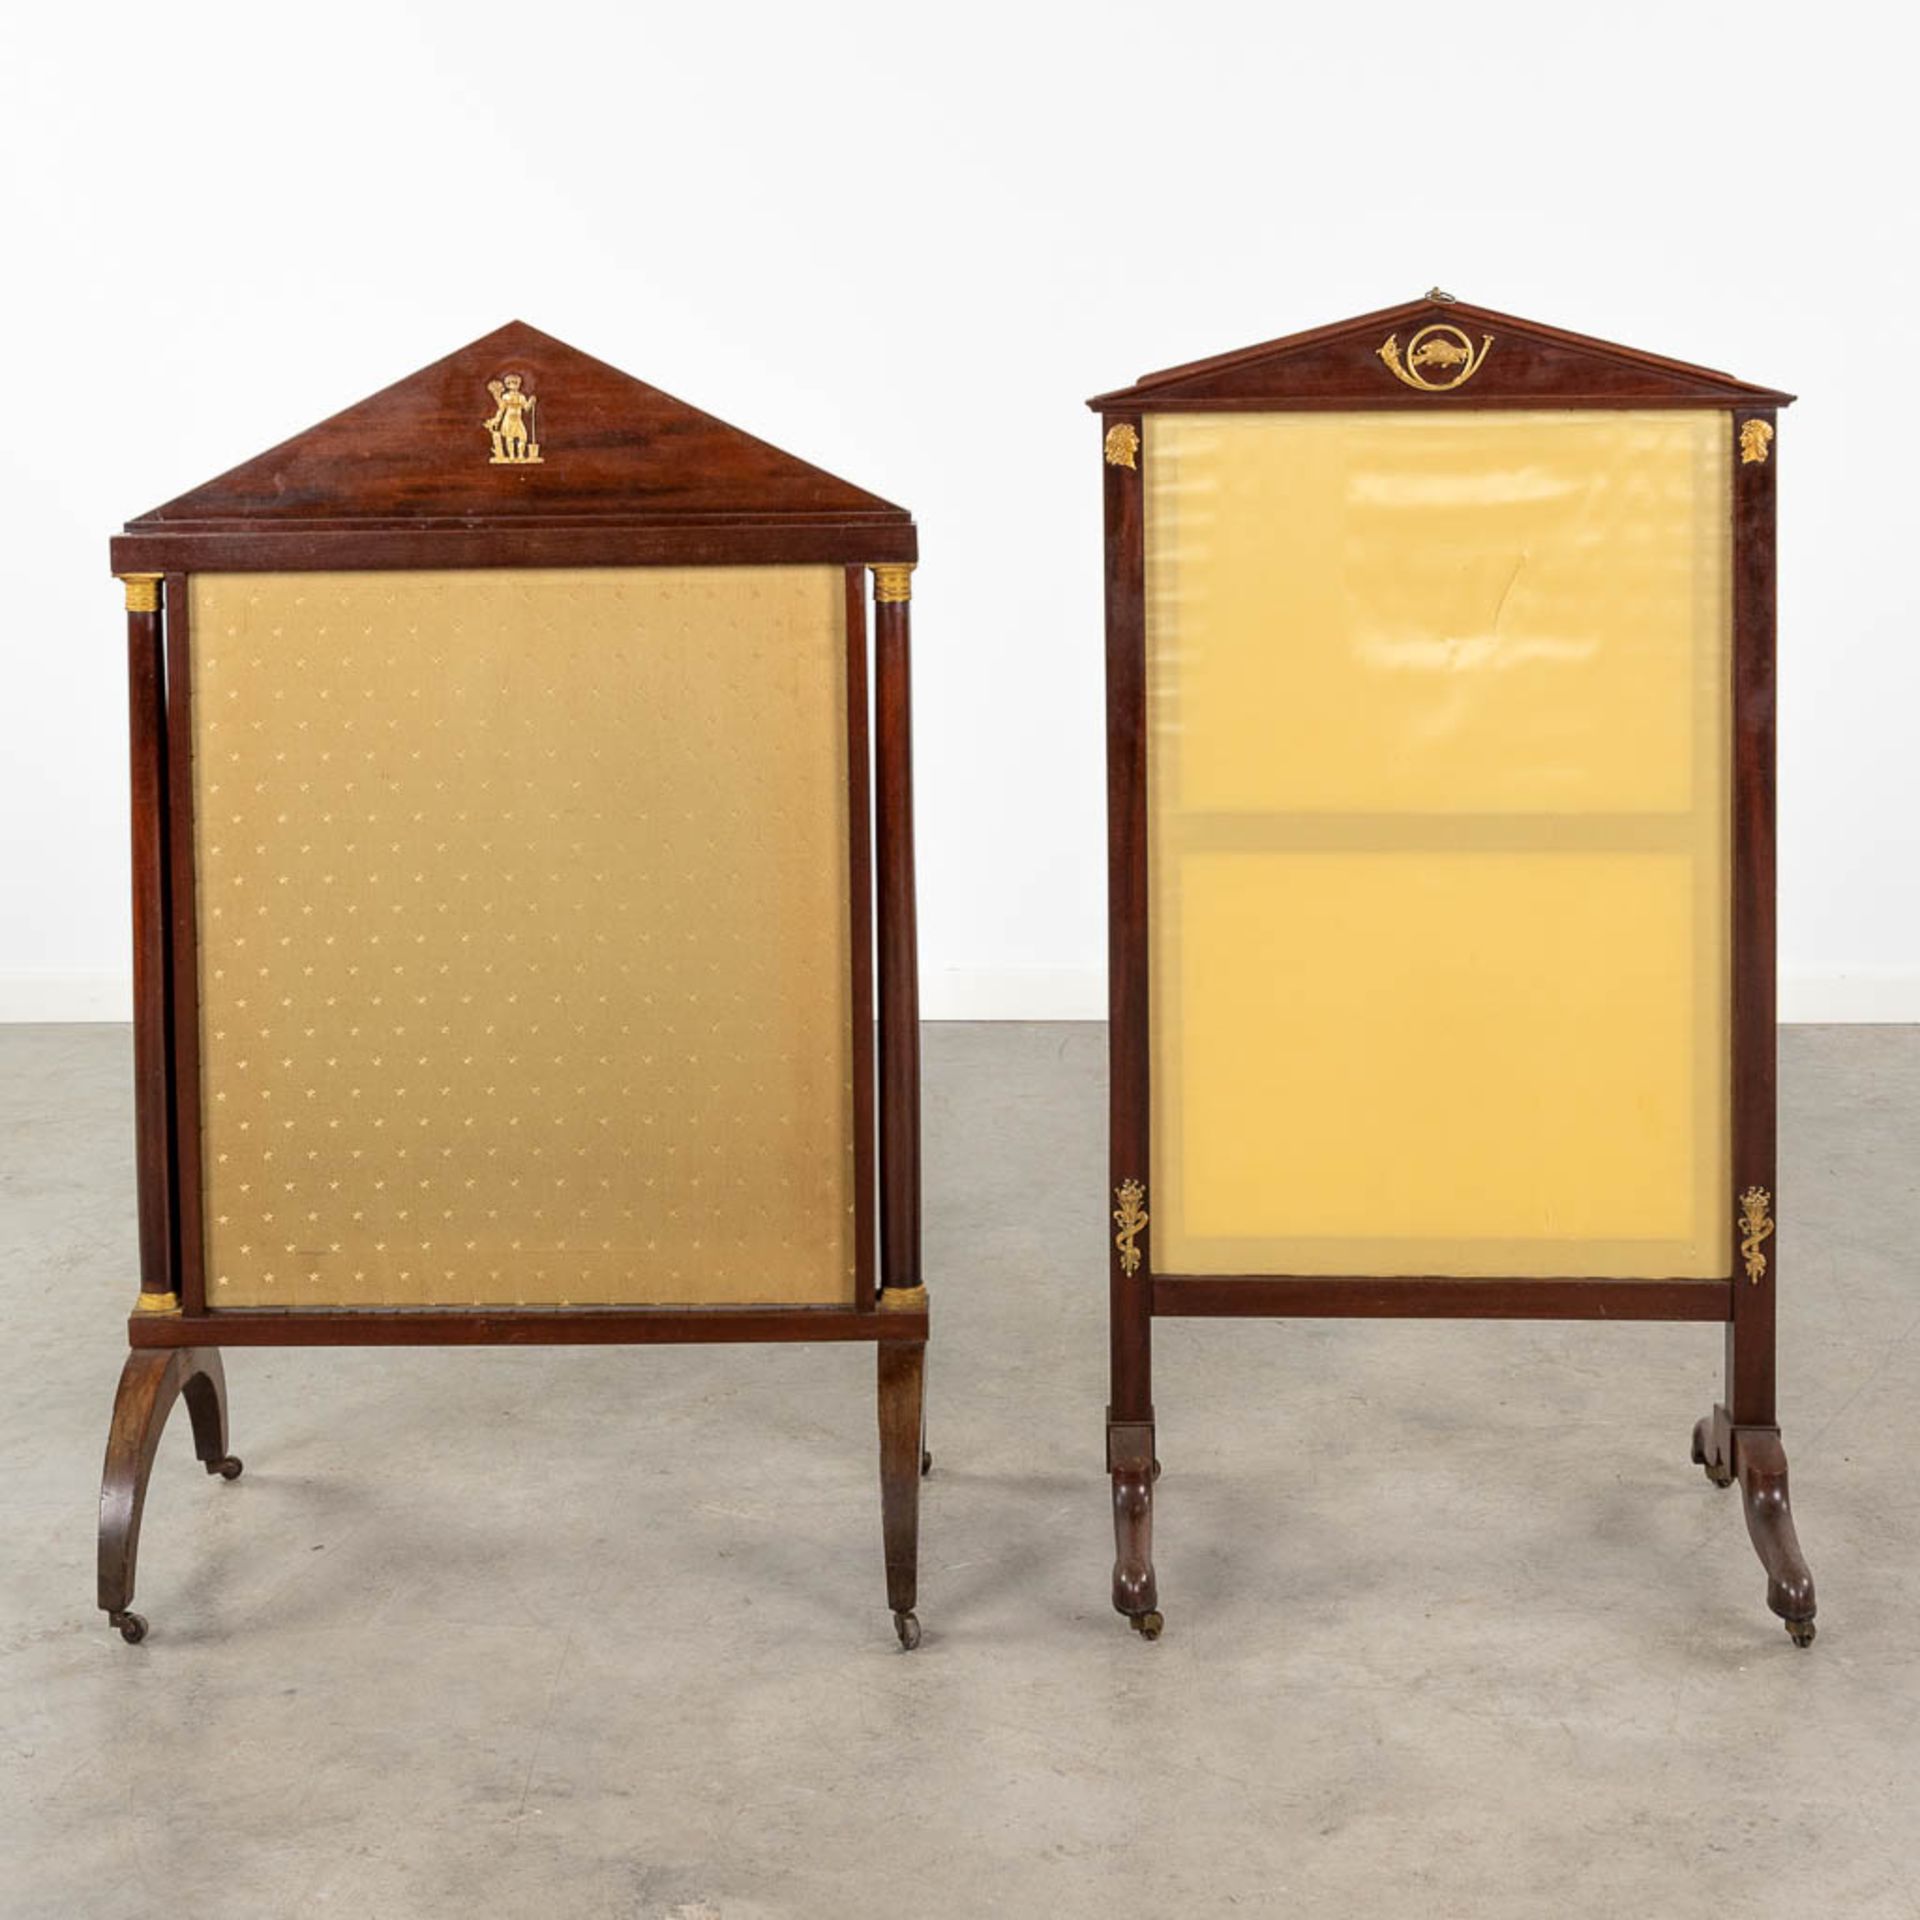 A collection of 2 fireplace screens, made of mahogany in empire style. 19th C. (W:56 x H:101 cm) - Image 3 of 15